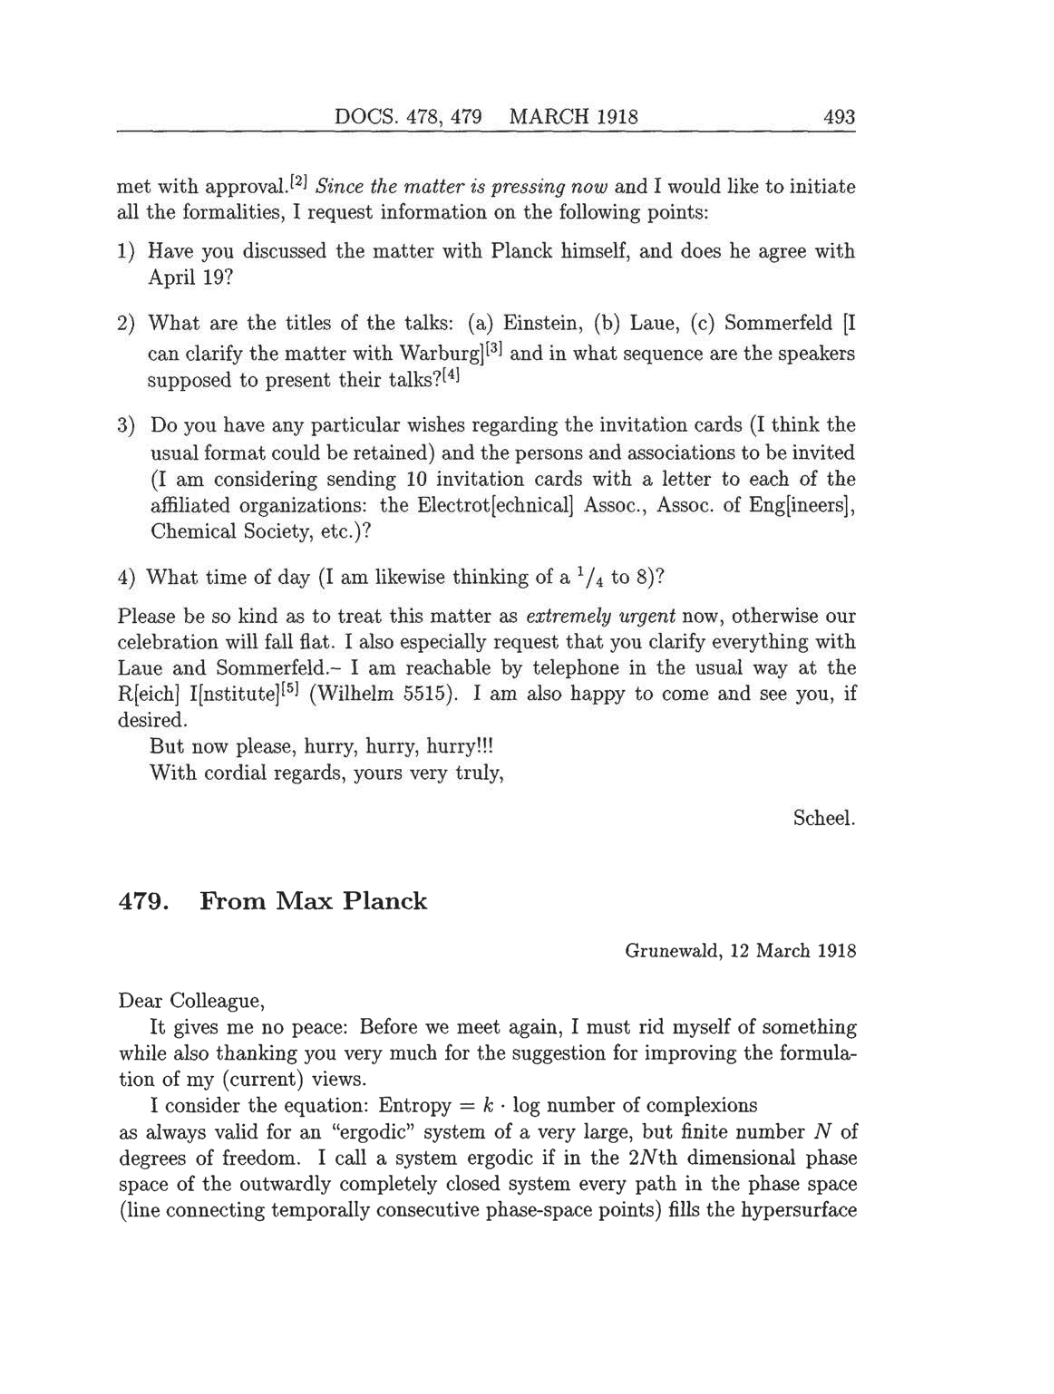 Volume 8: The Berlin Years: Correspondence, 1914-1918 (English translation supplement) page 493